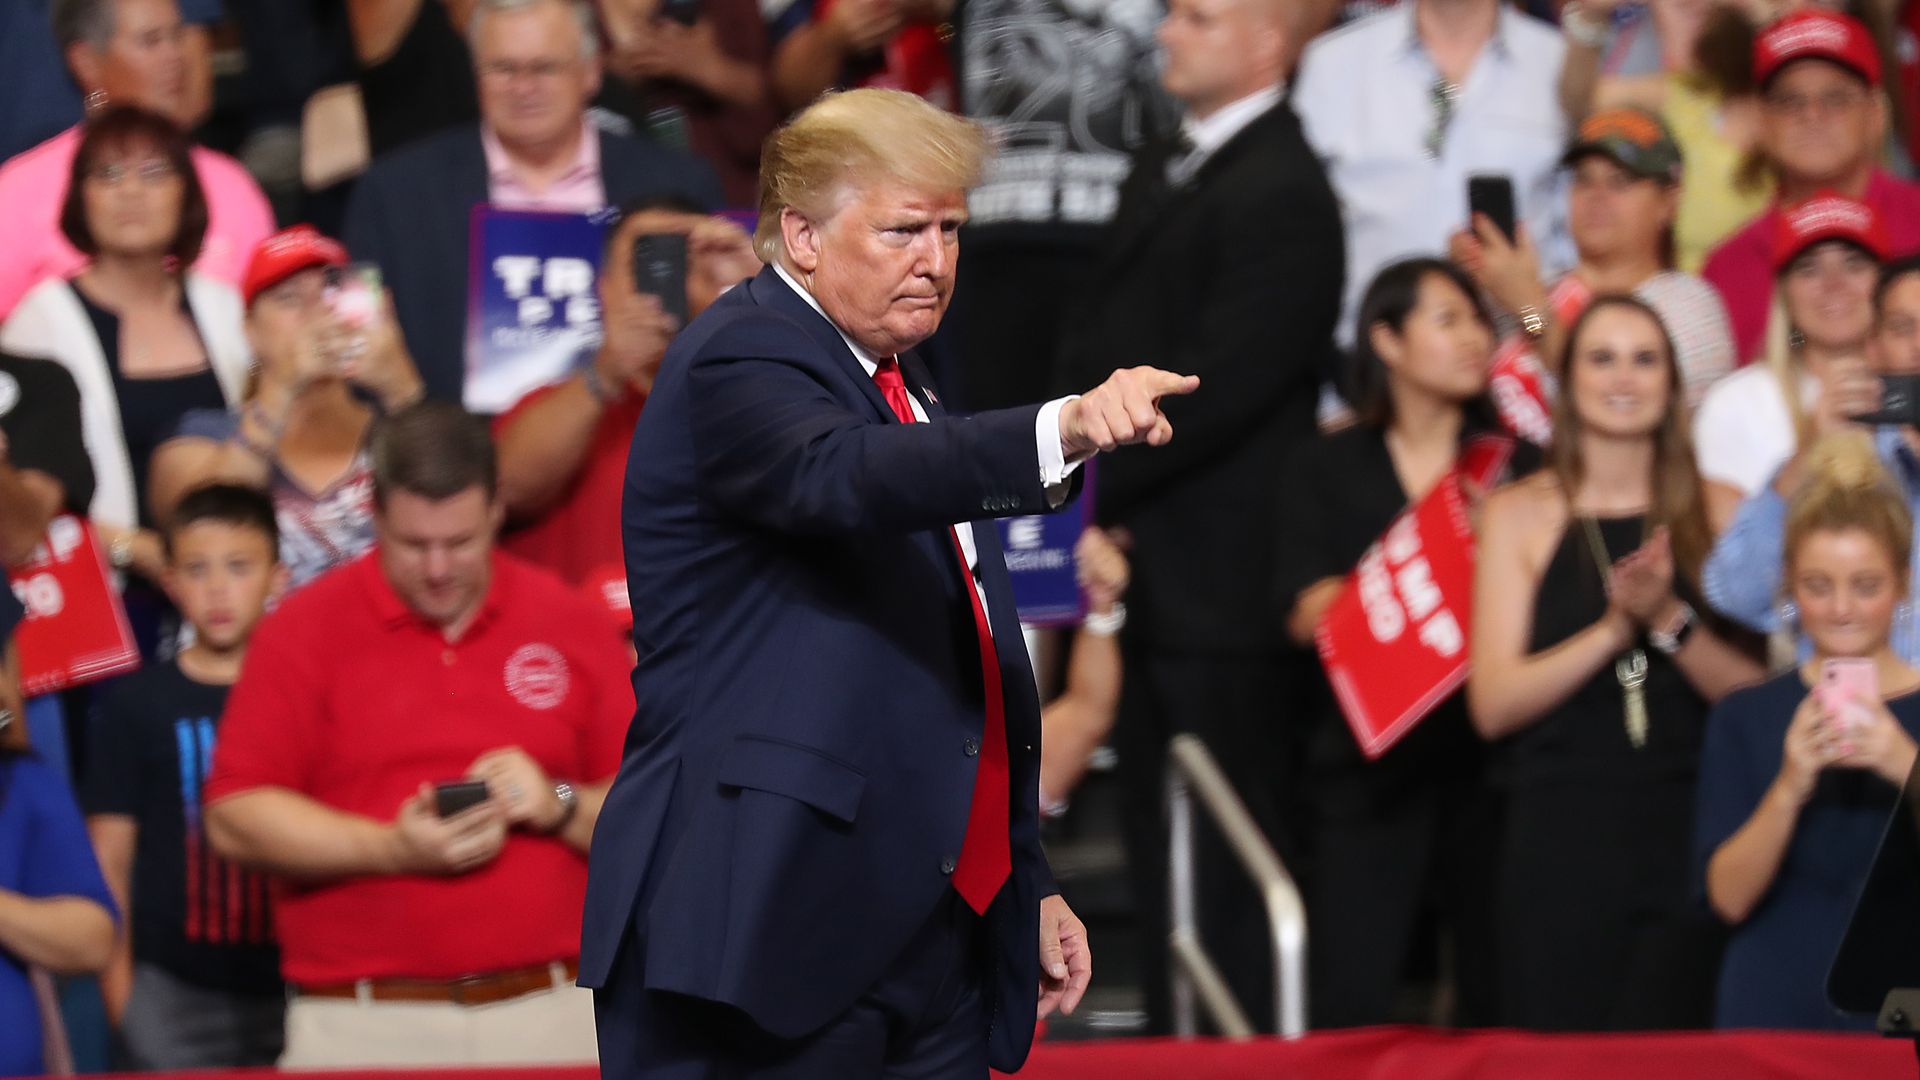 President Trump at his 2020 reelection rally